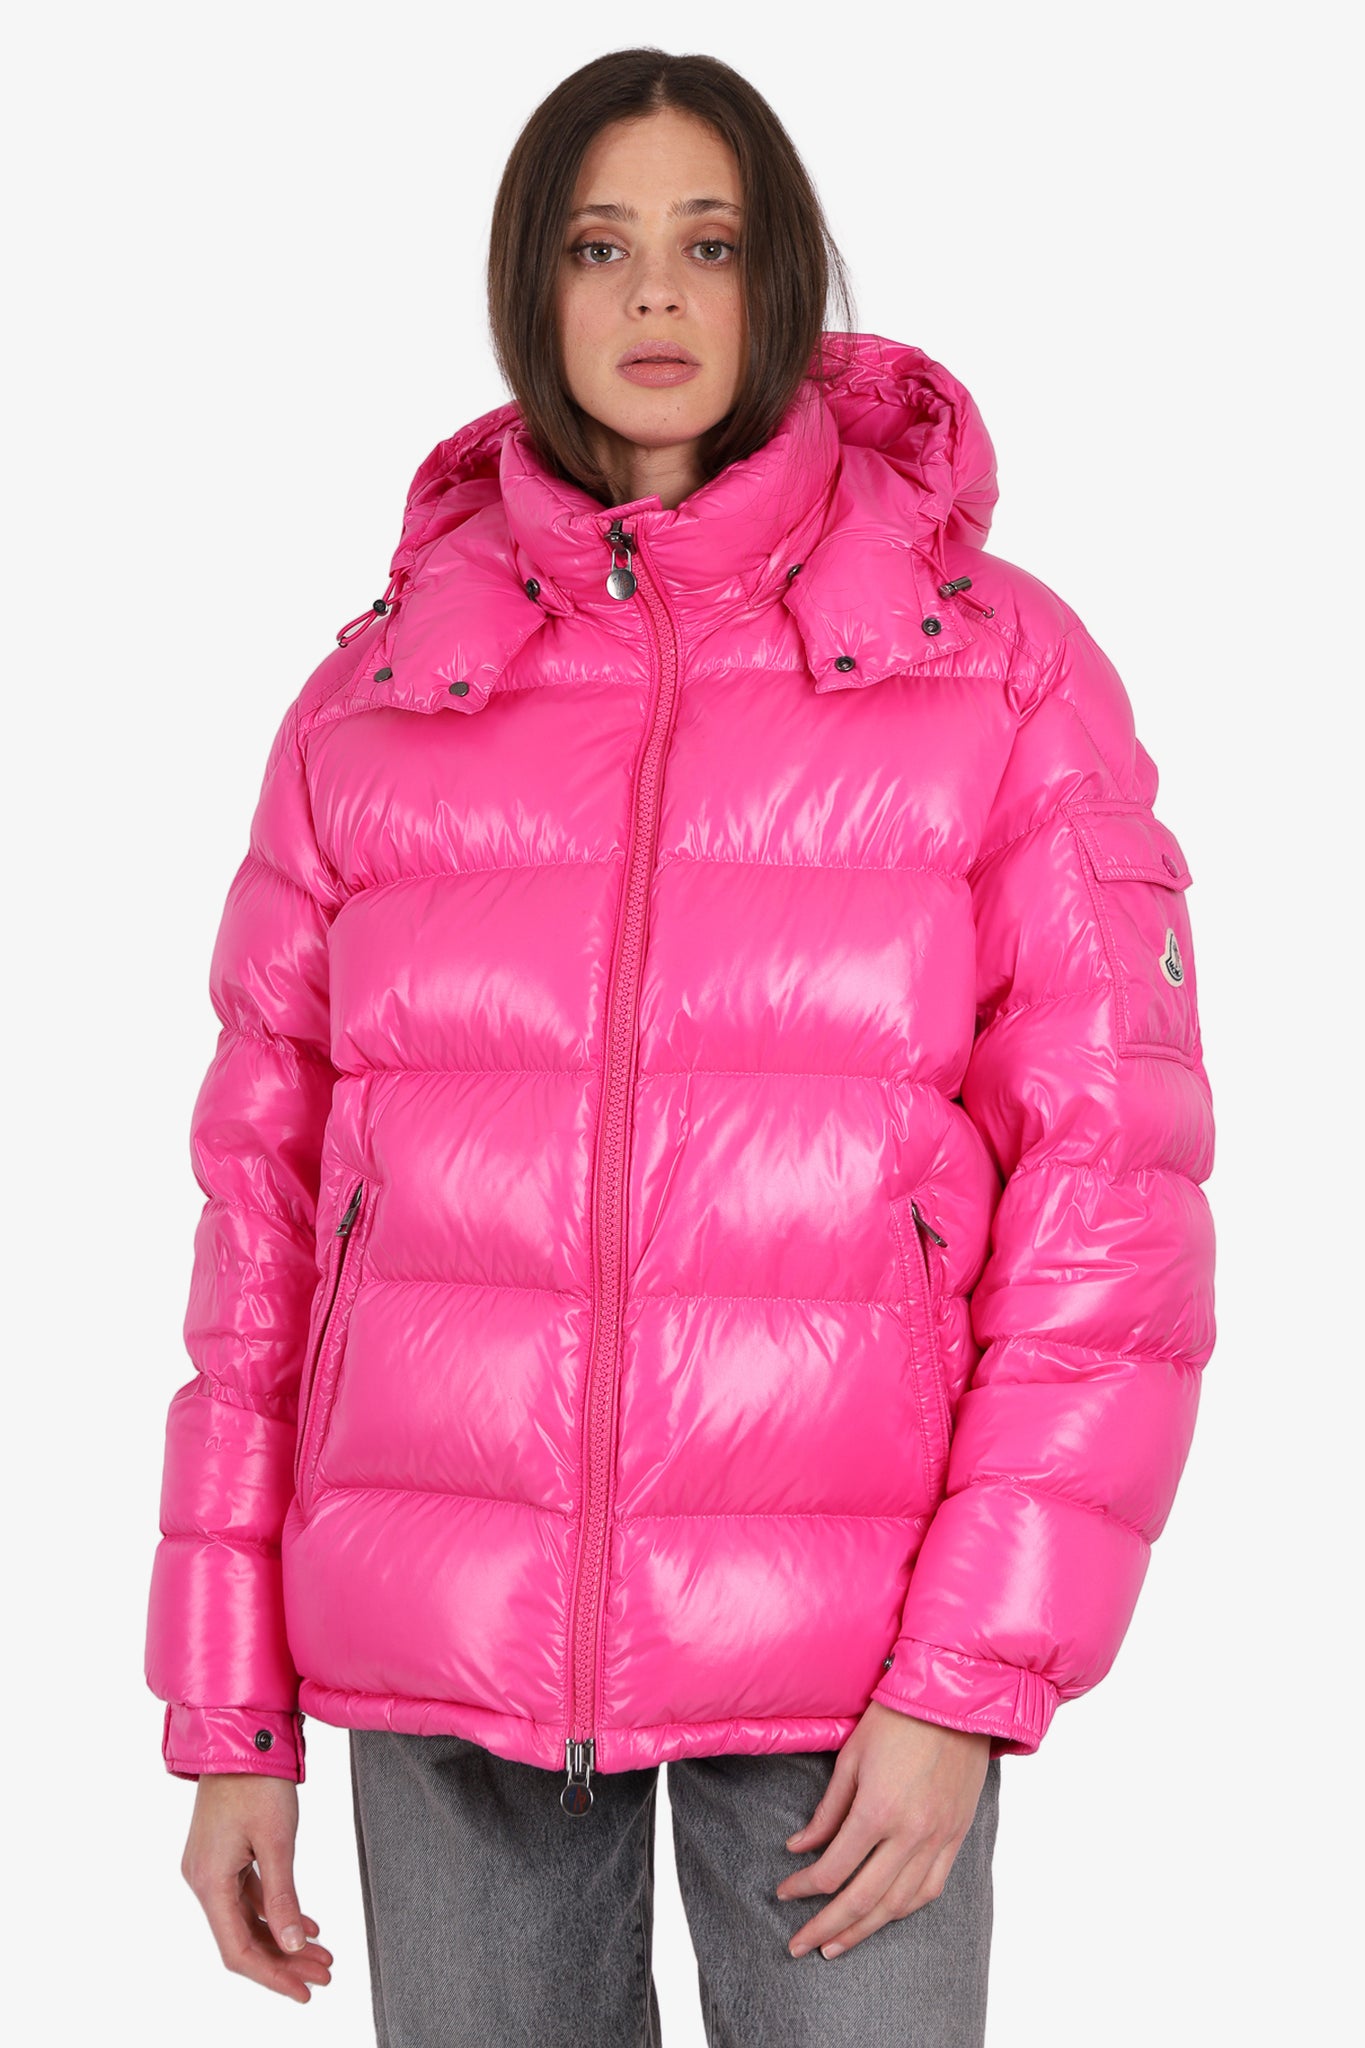 Moncler Pink Quilted 'Maya Giubbotto' Hooded Down Jacket Size 6